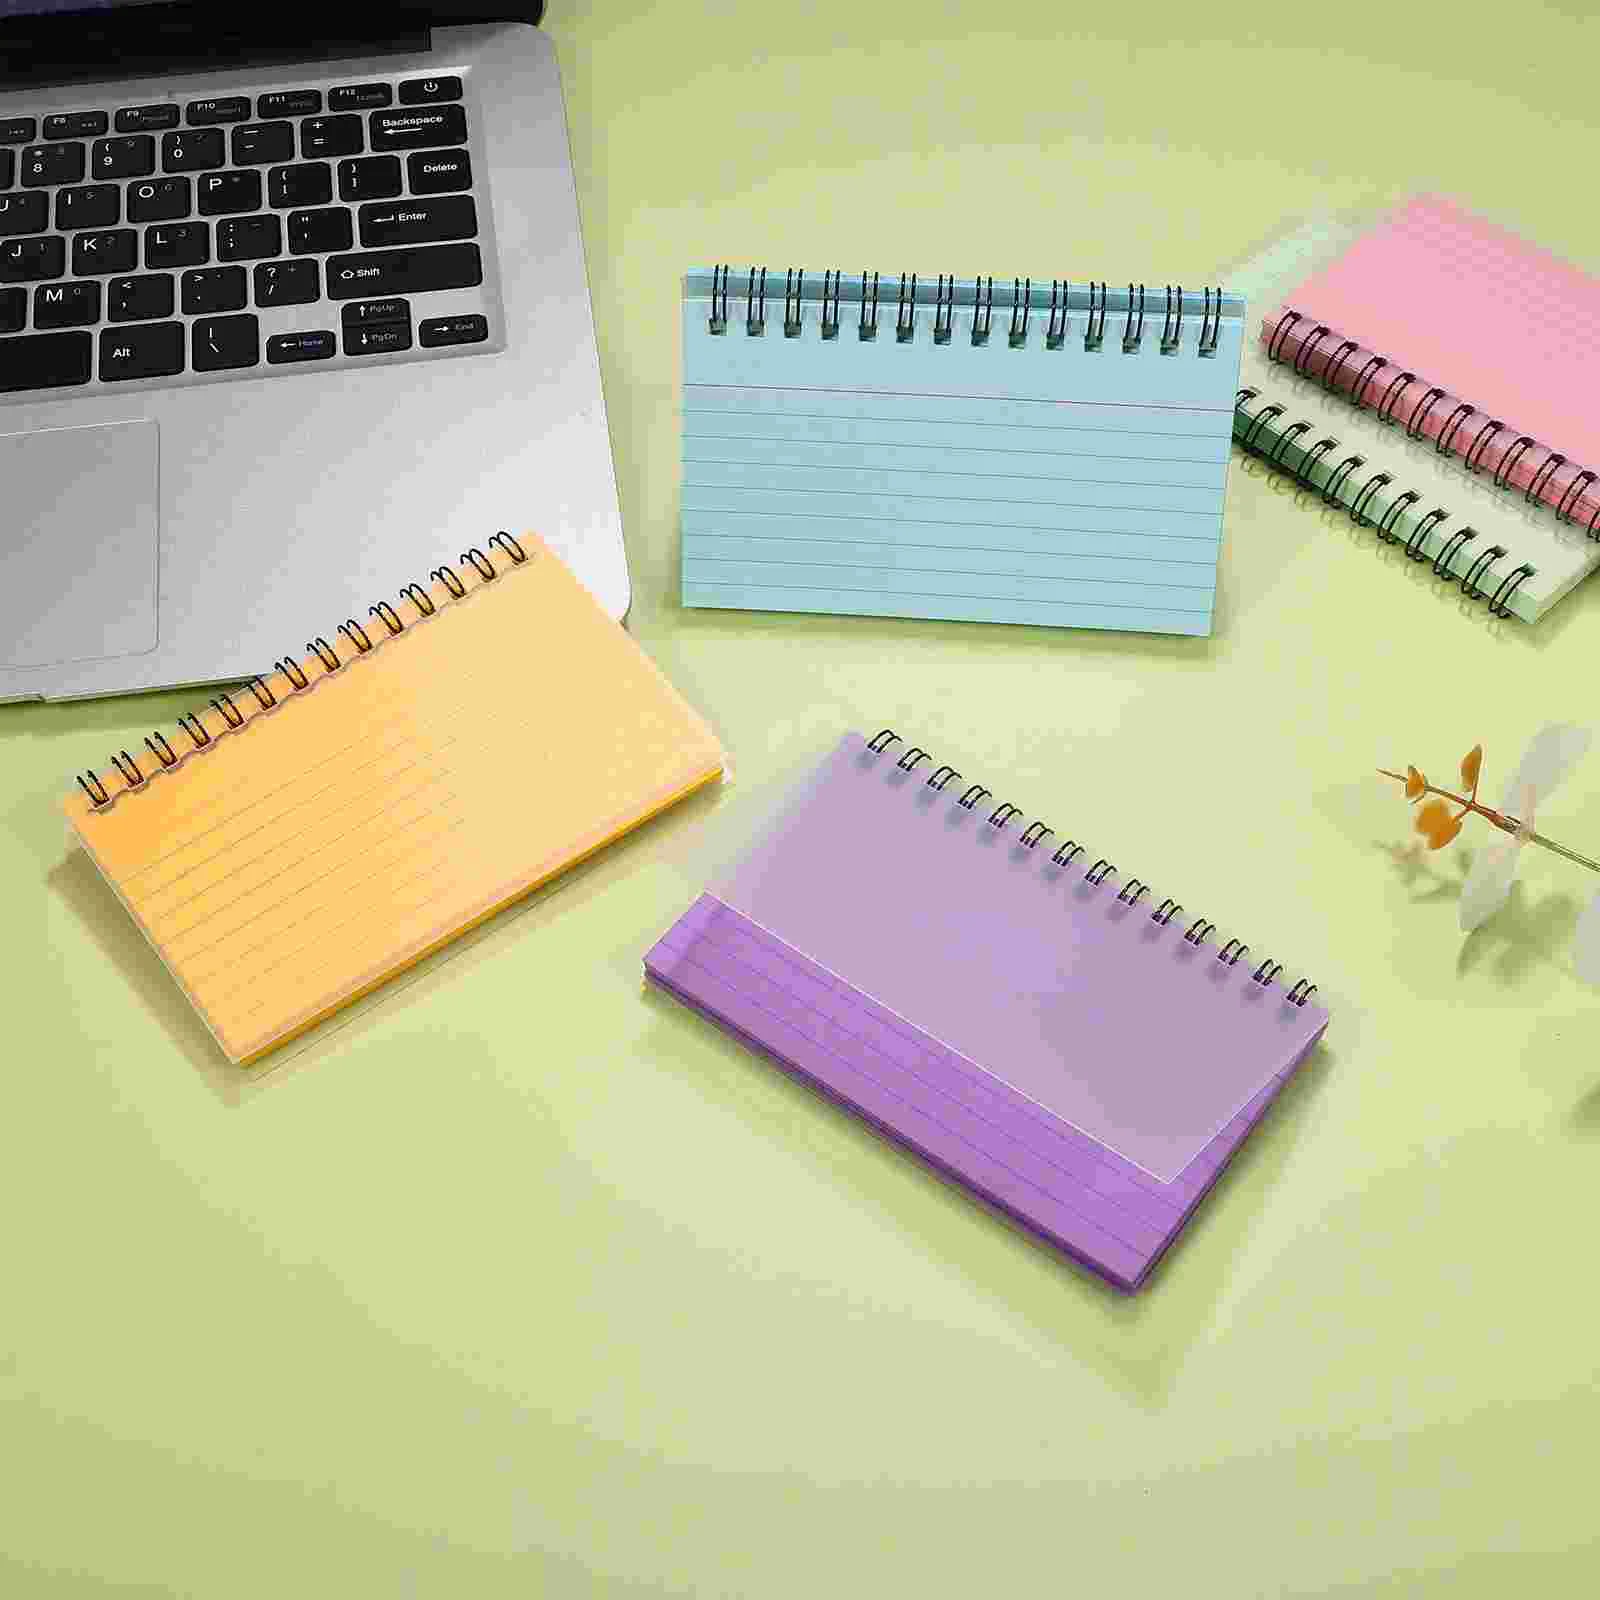 

5 Pcs Notebook Index Cards Small Spiral Notebooks Papers Record Notepad Blank Meeting Speech Flashcards for study